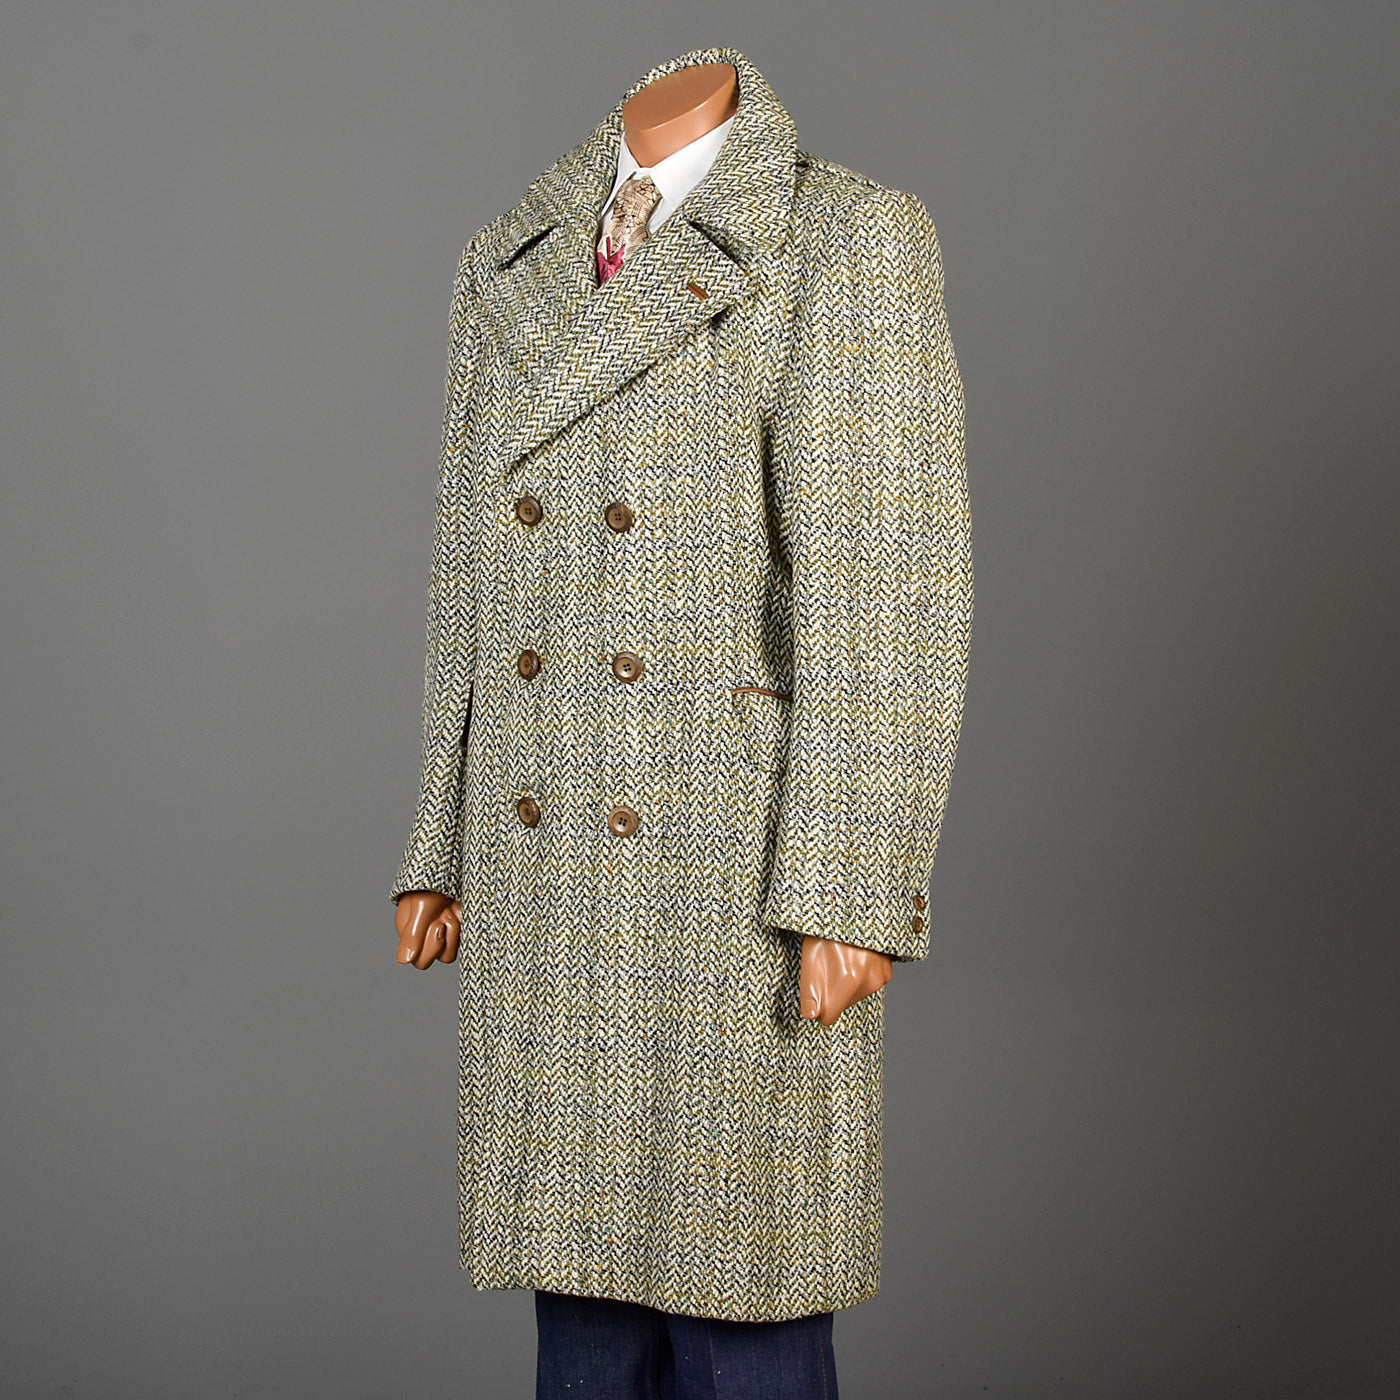 1970s Men's Cortafiel Tweed Overcoat, Double Breasted with a Belted Back